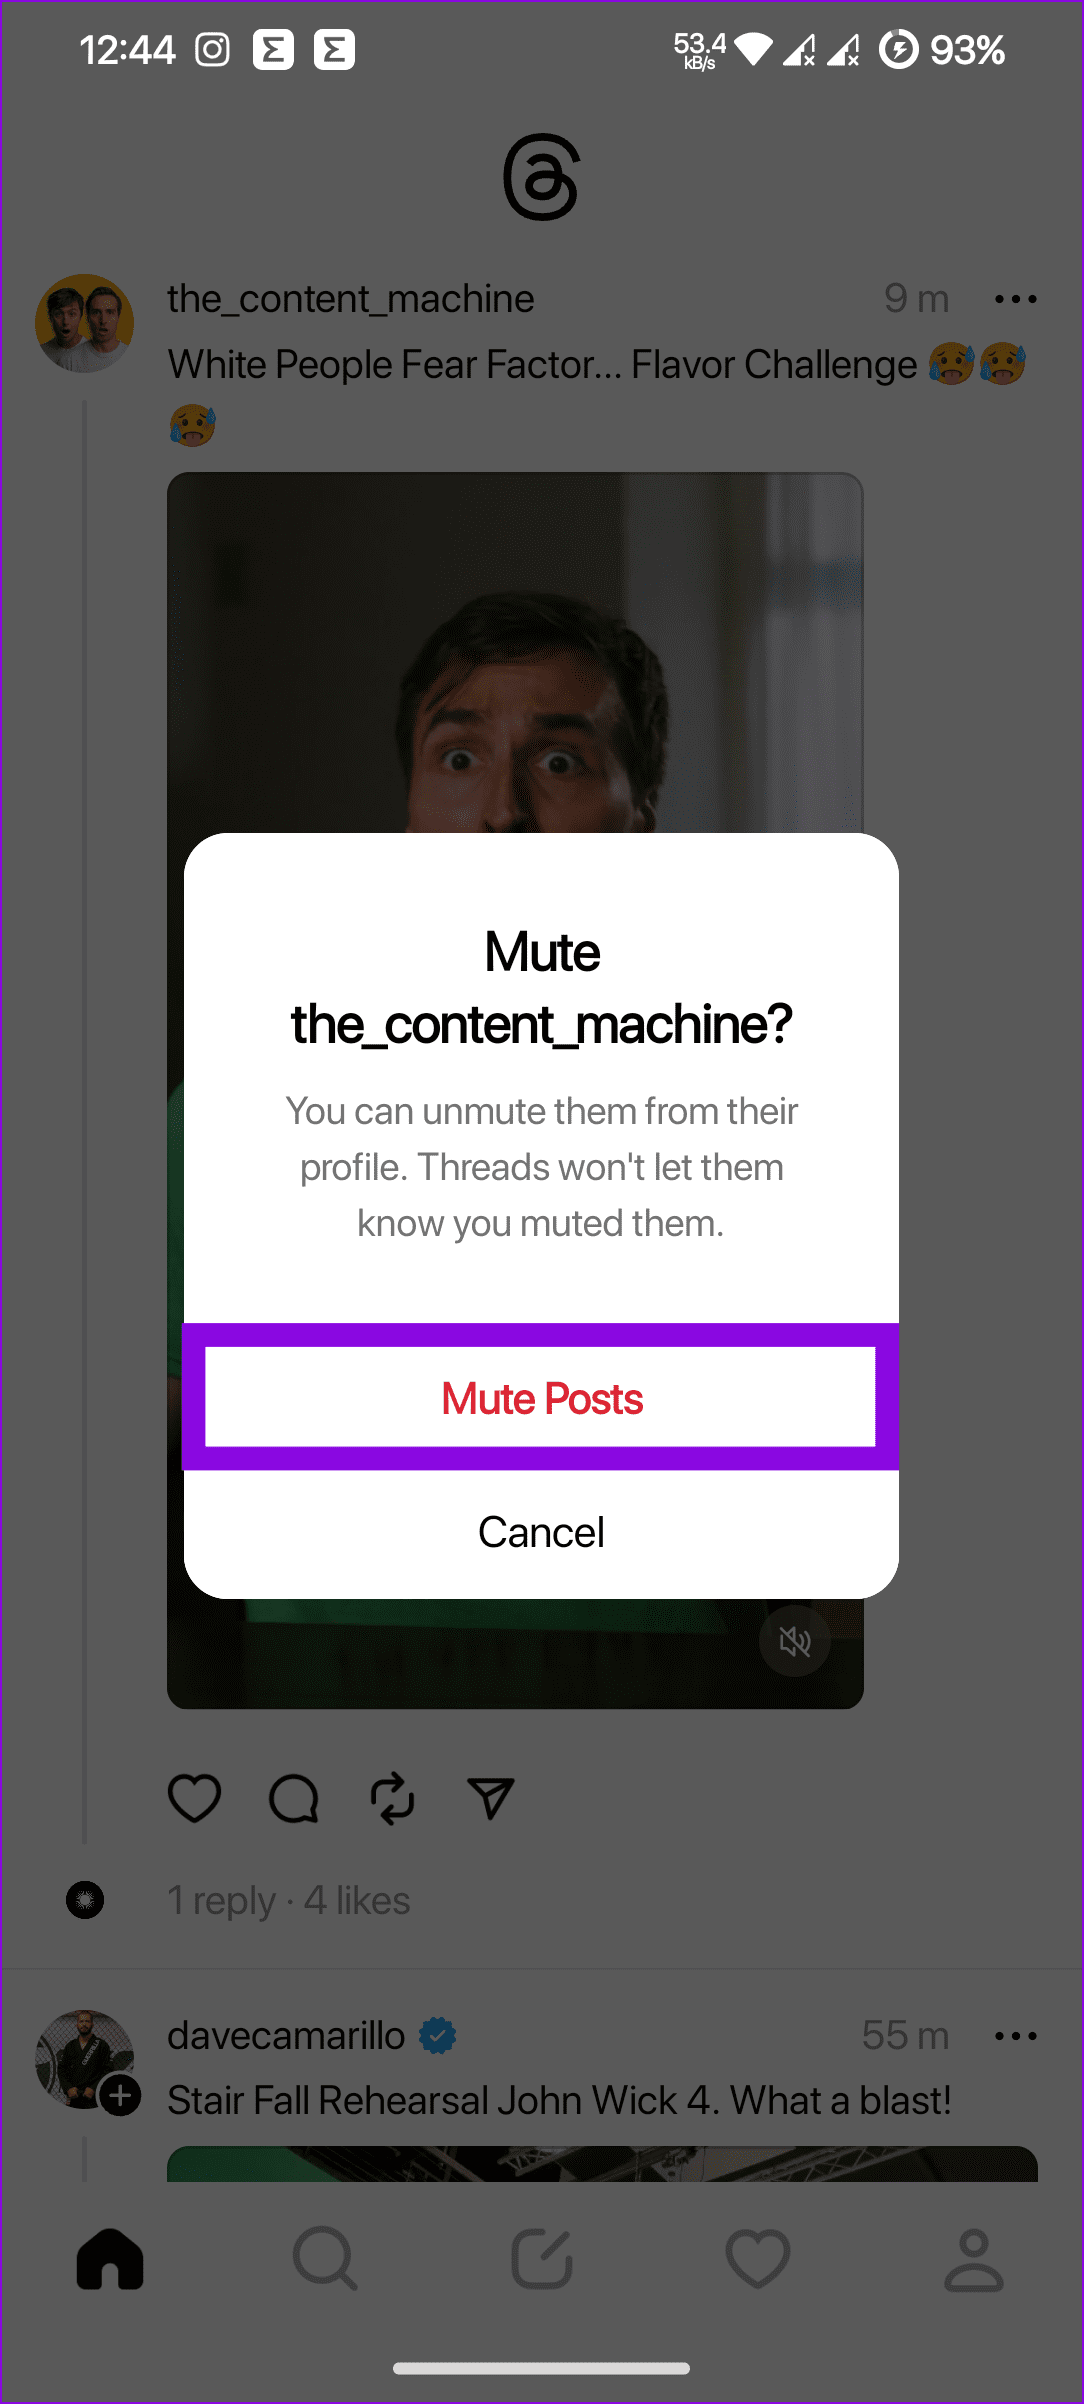 choose mute posts to confirm